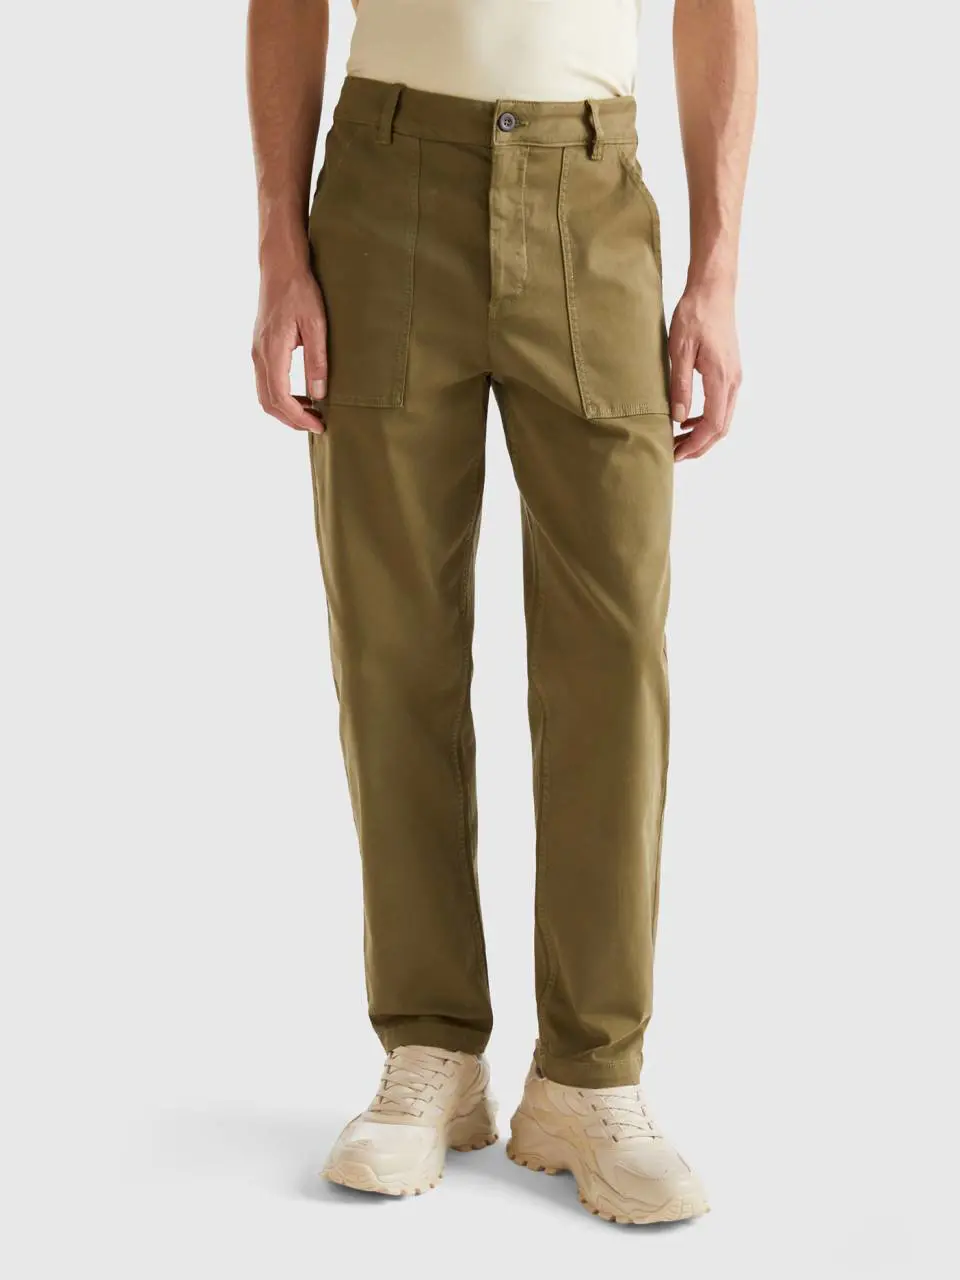 Benetton straight trousers with low crotch. 1